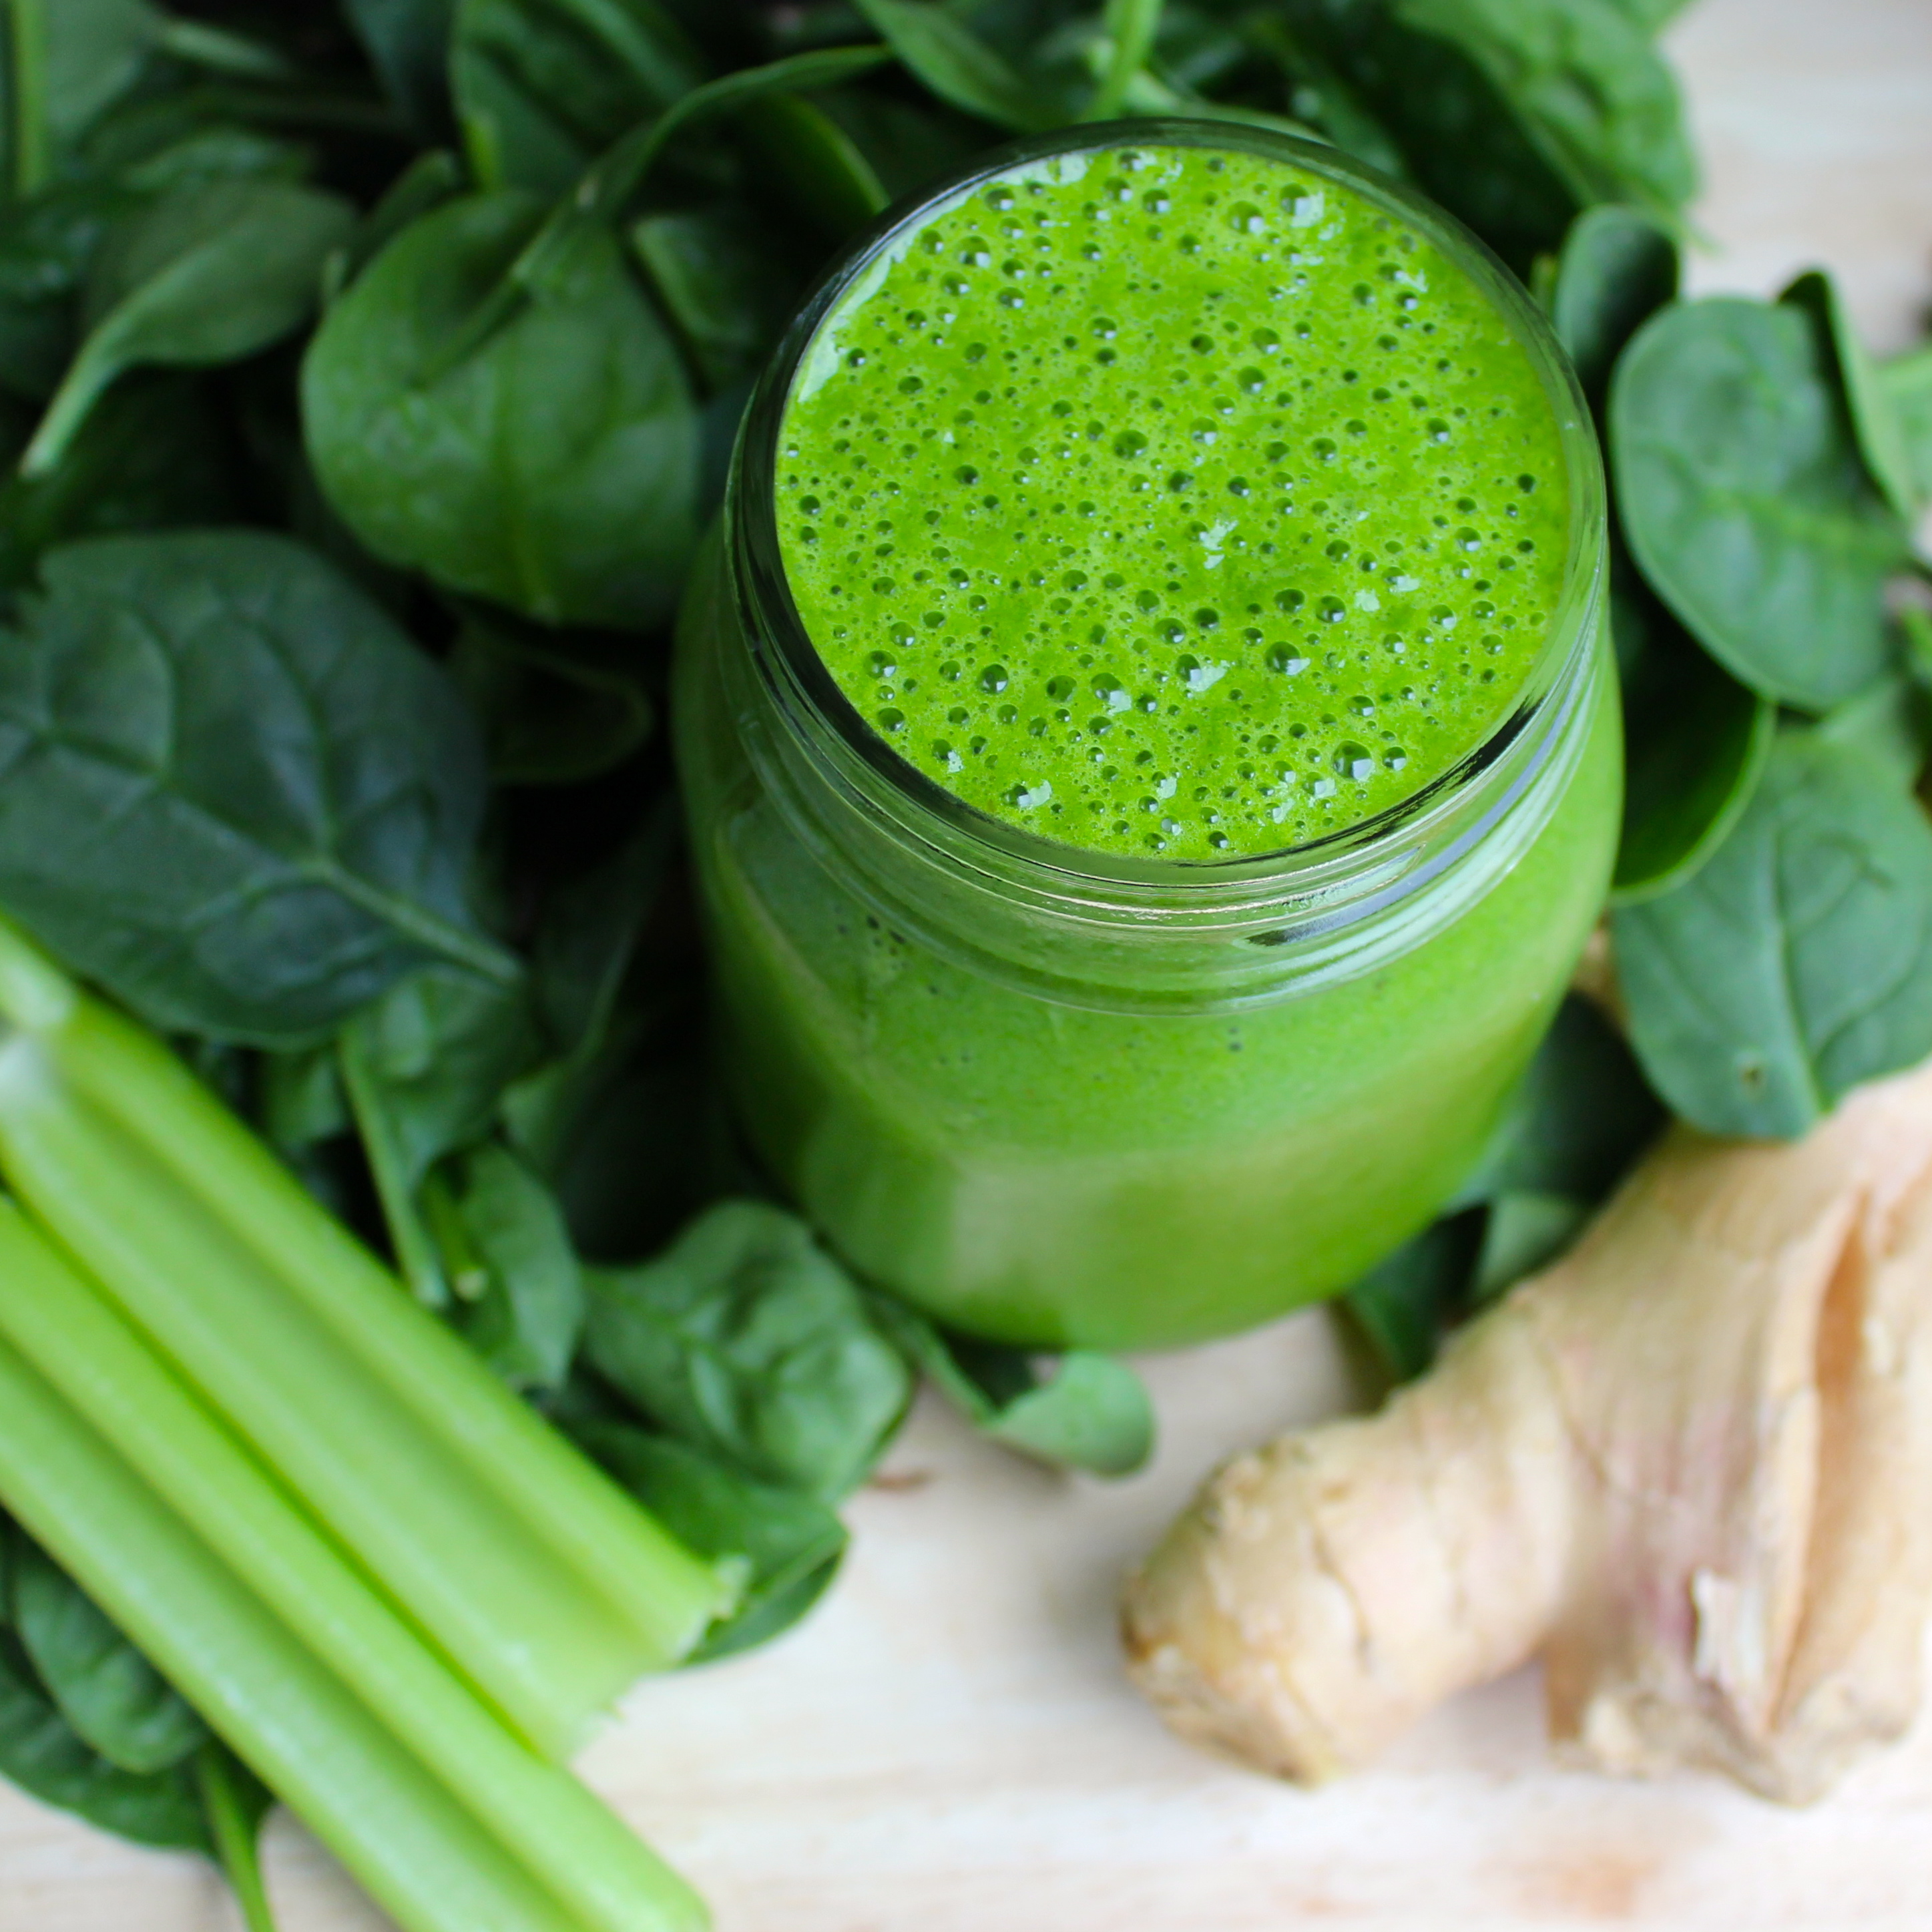 Why I Drink 1 Green Smoothie A Day